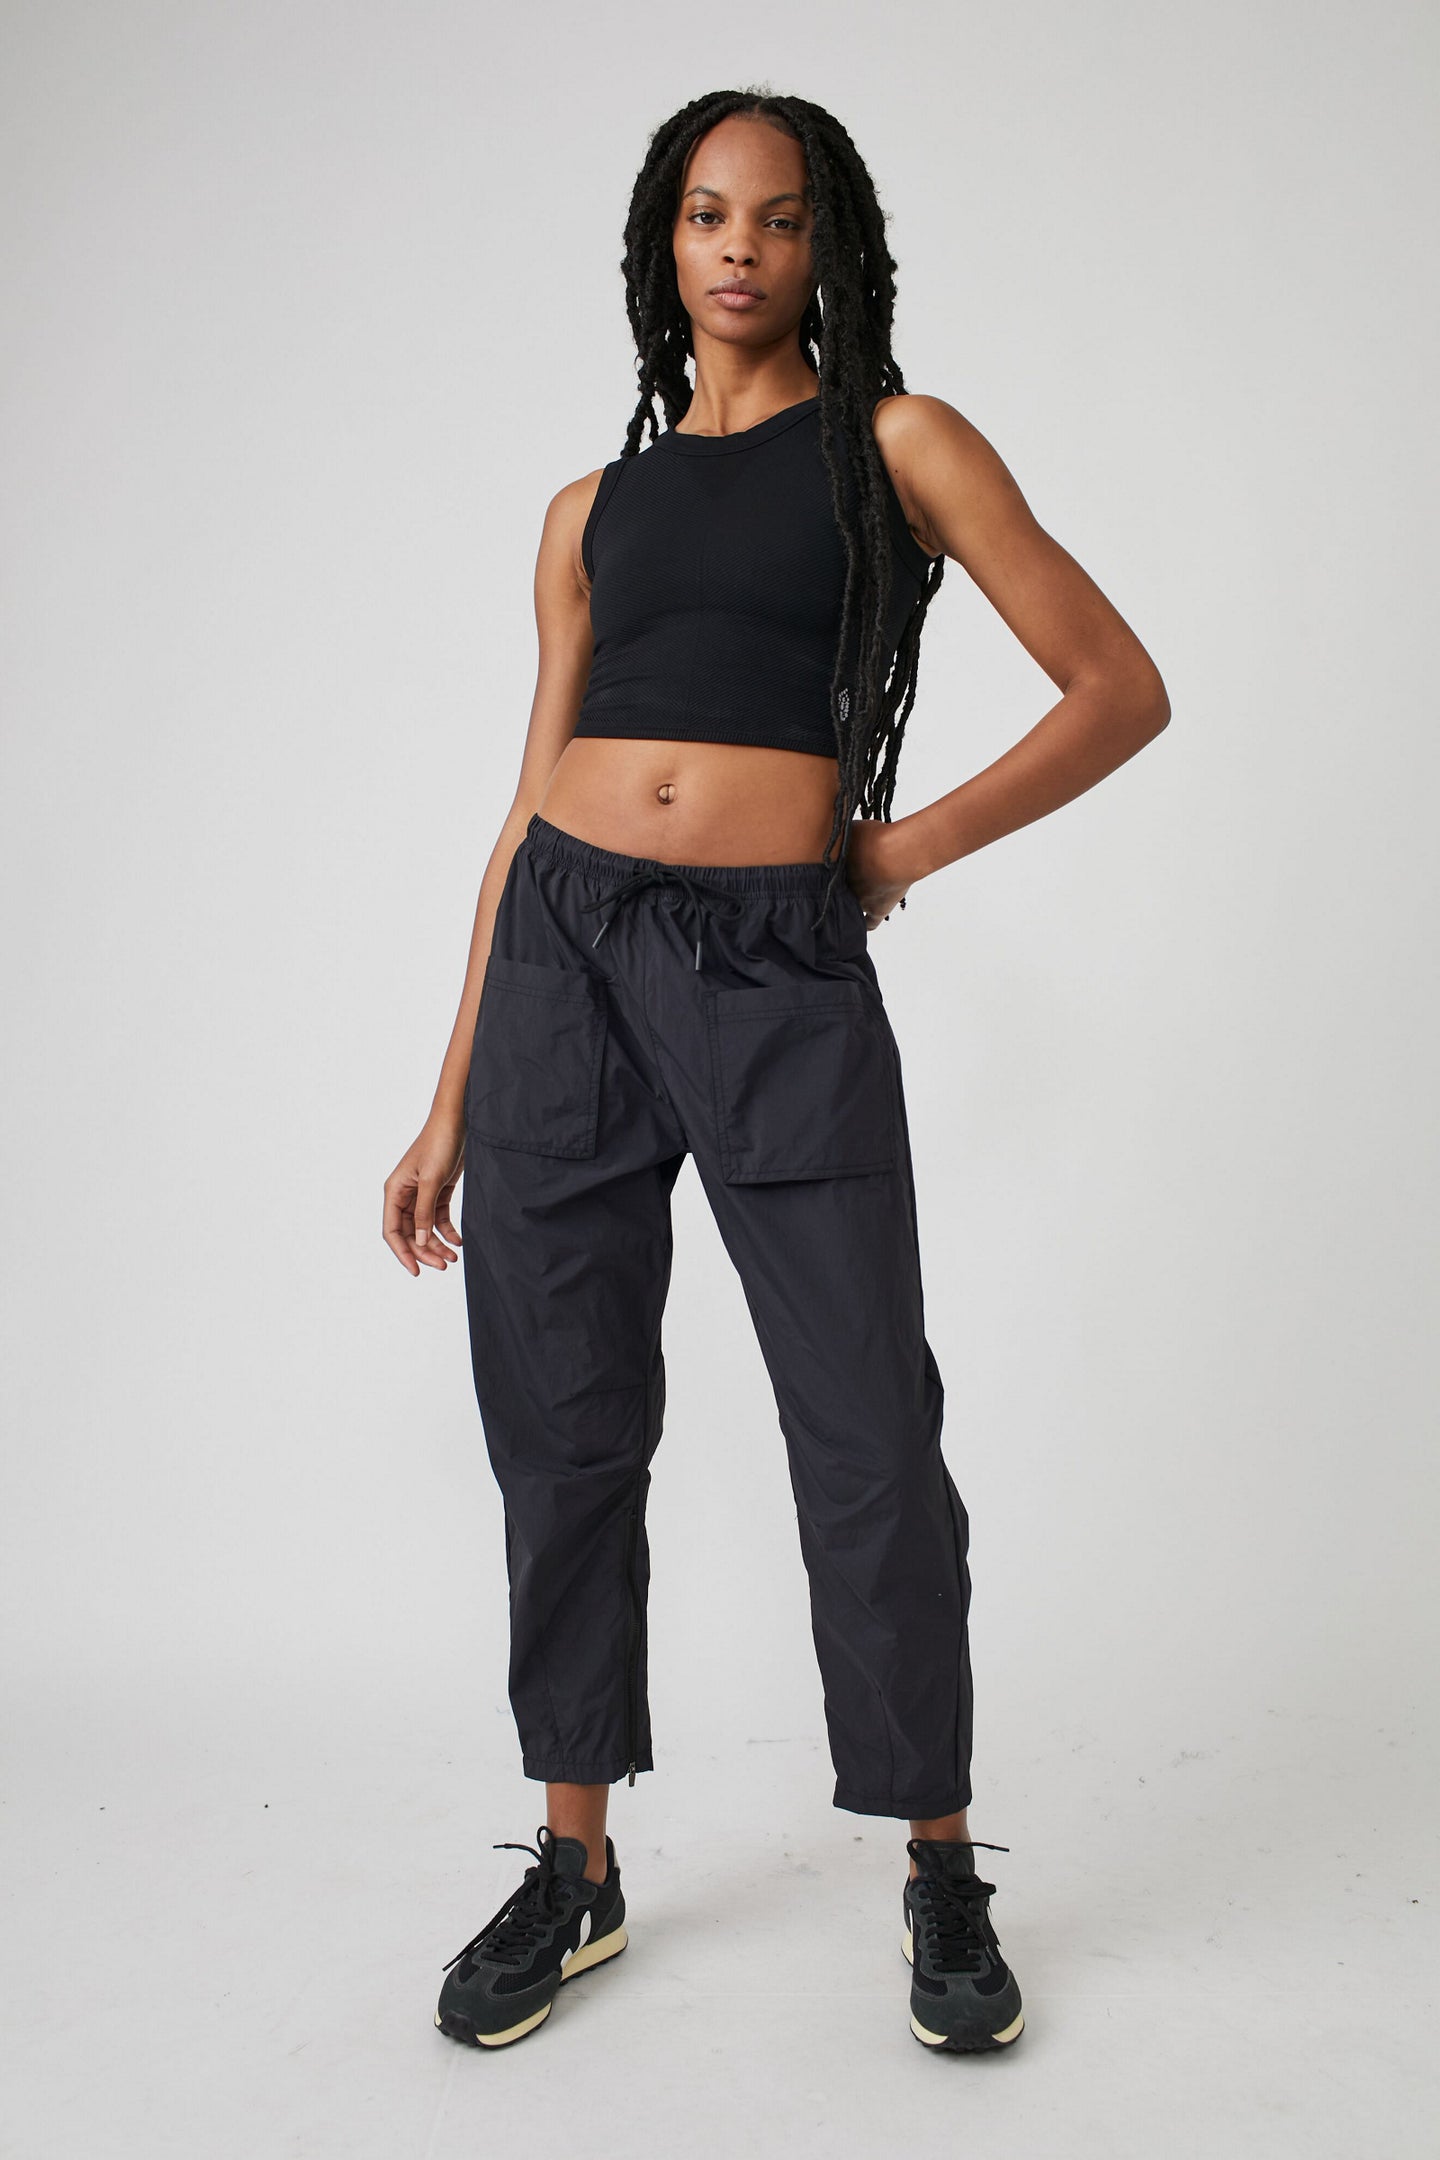 FREE PEOPLE- FLY BY NIGHT PANT